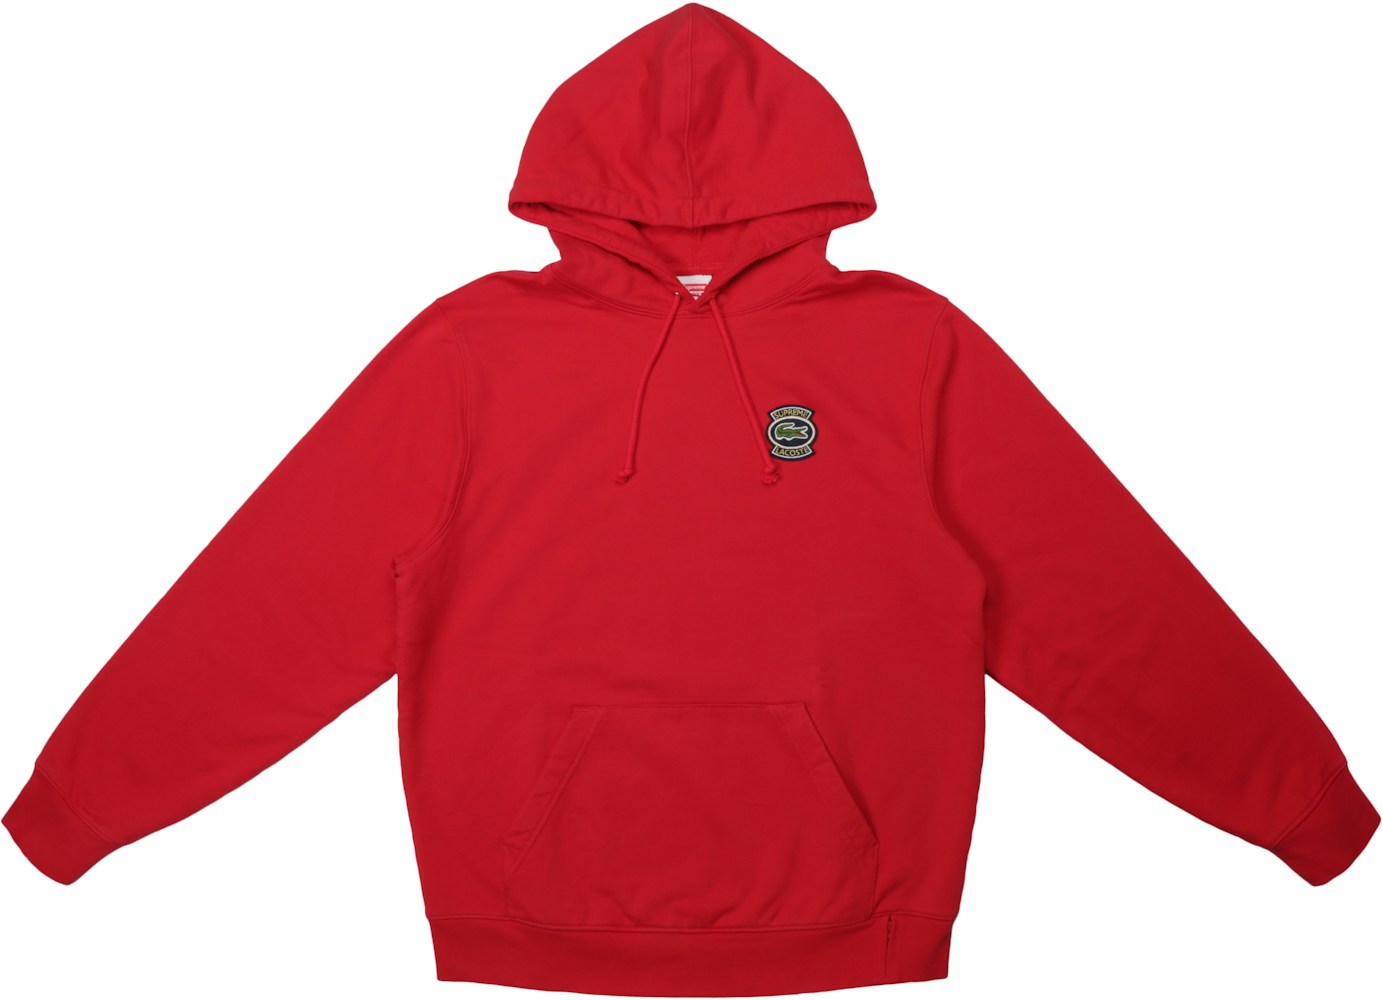 Sandet chance Investere Supreme LACOSTE Hooded Sweatshirt Red - SS18